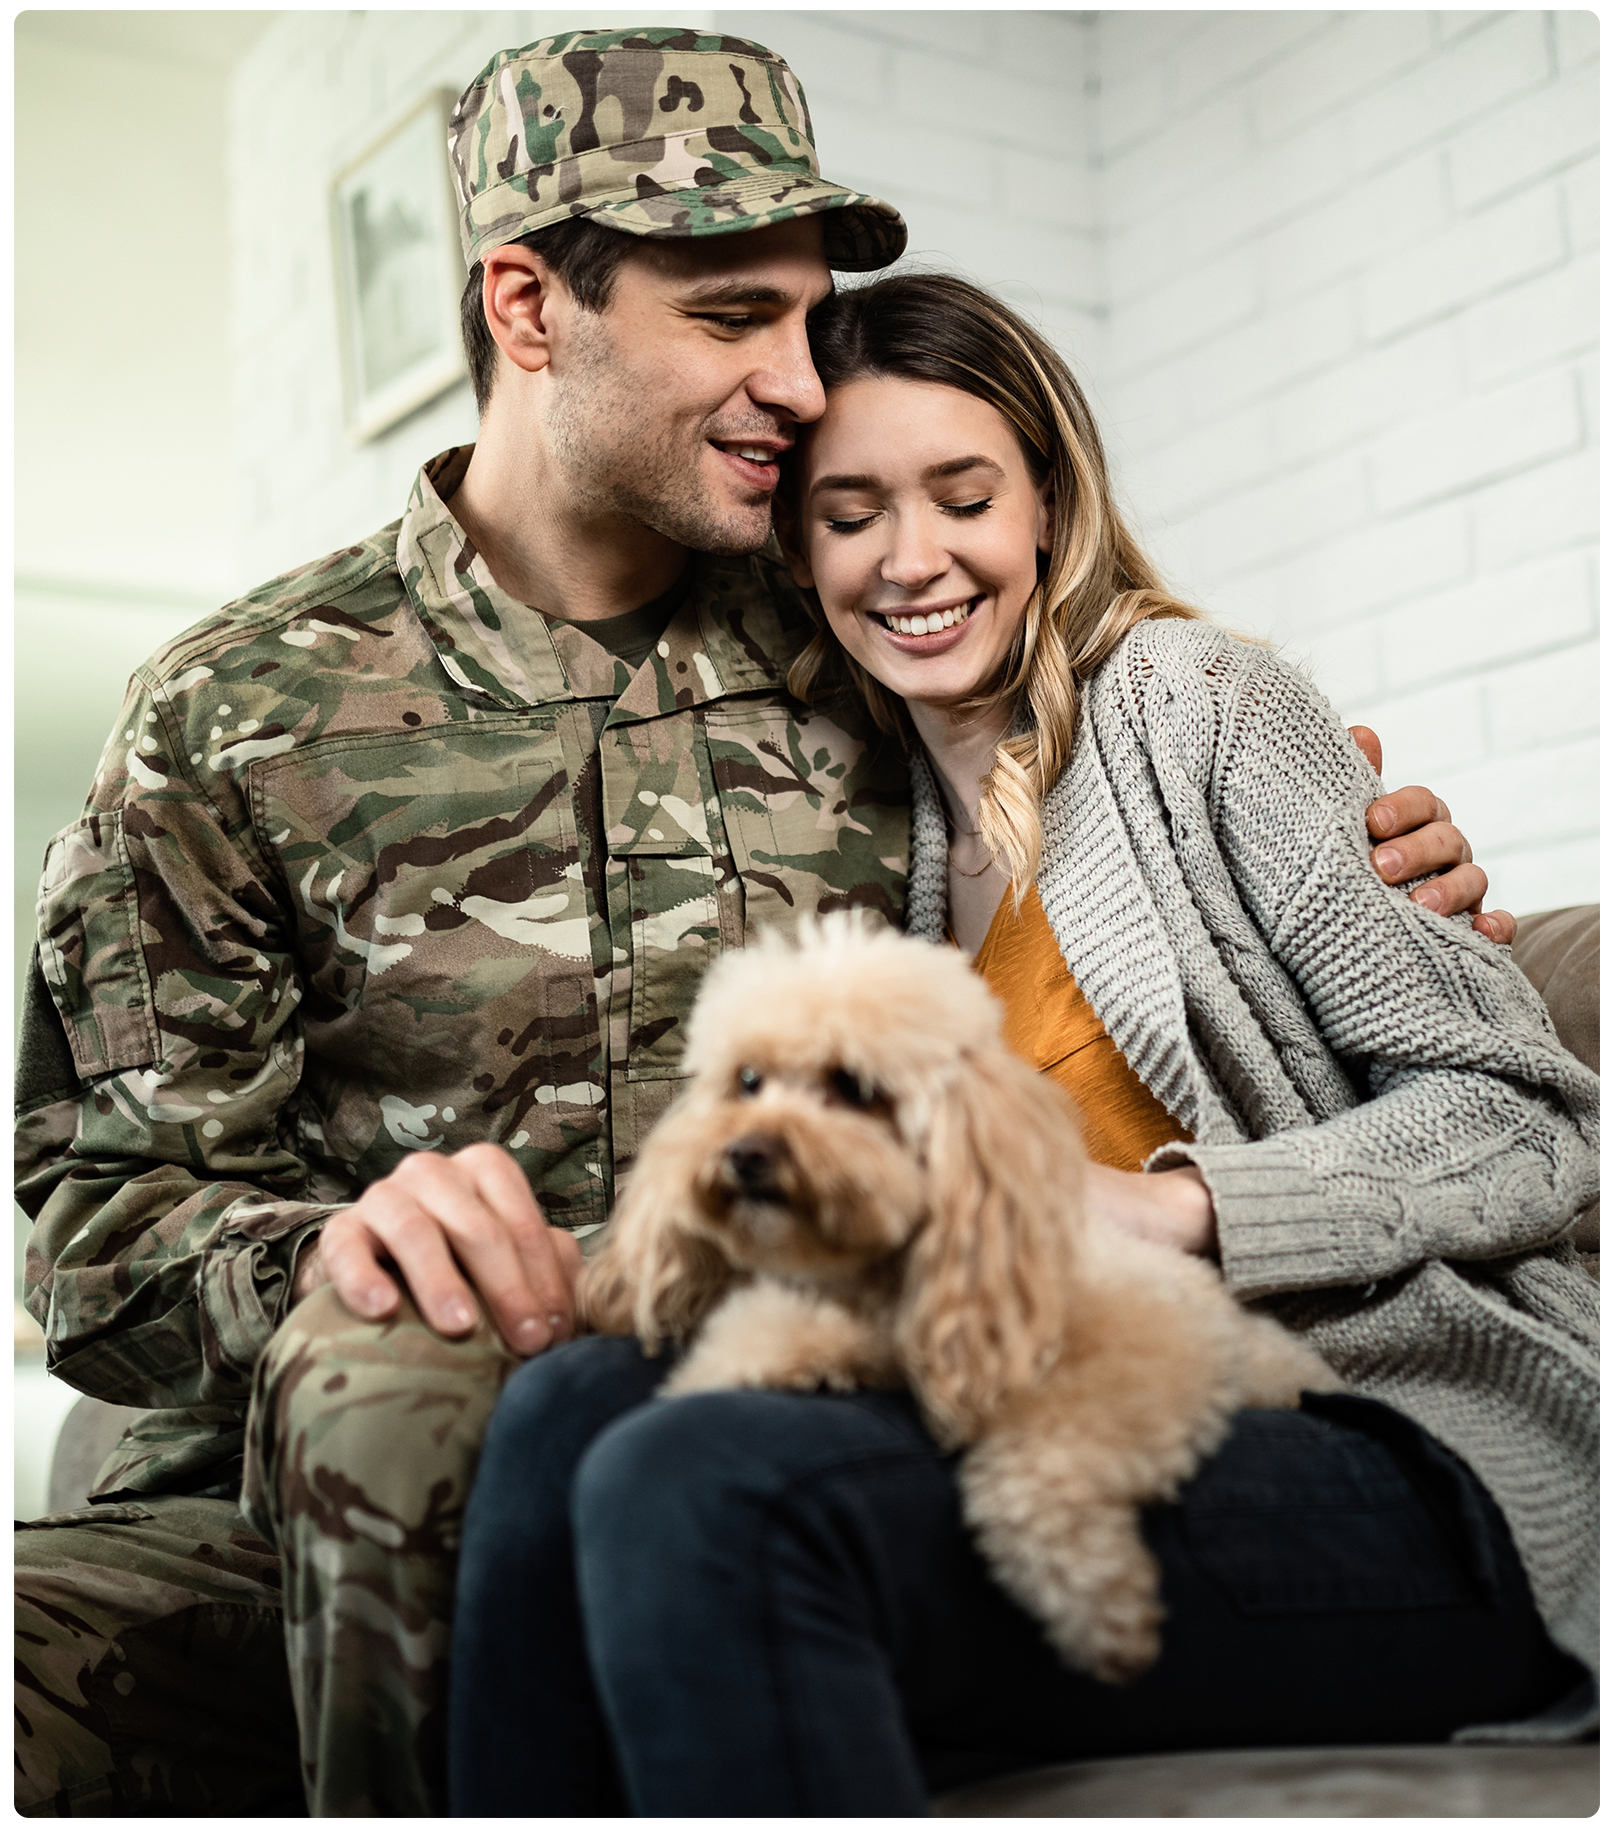 Military member with wife and dog